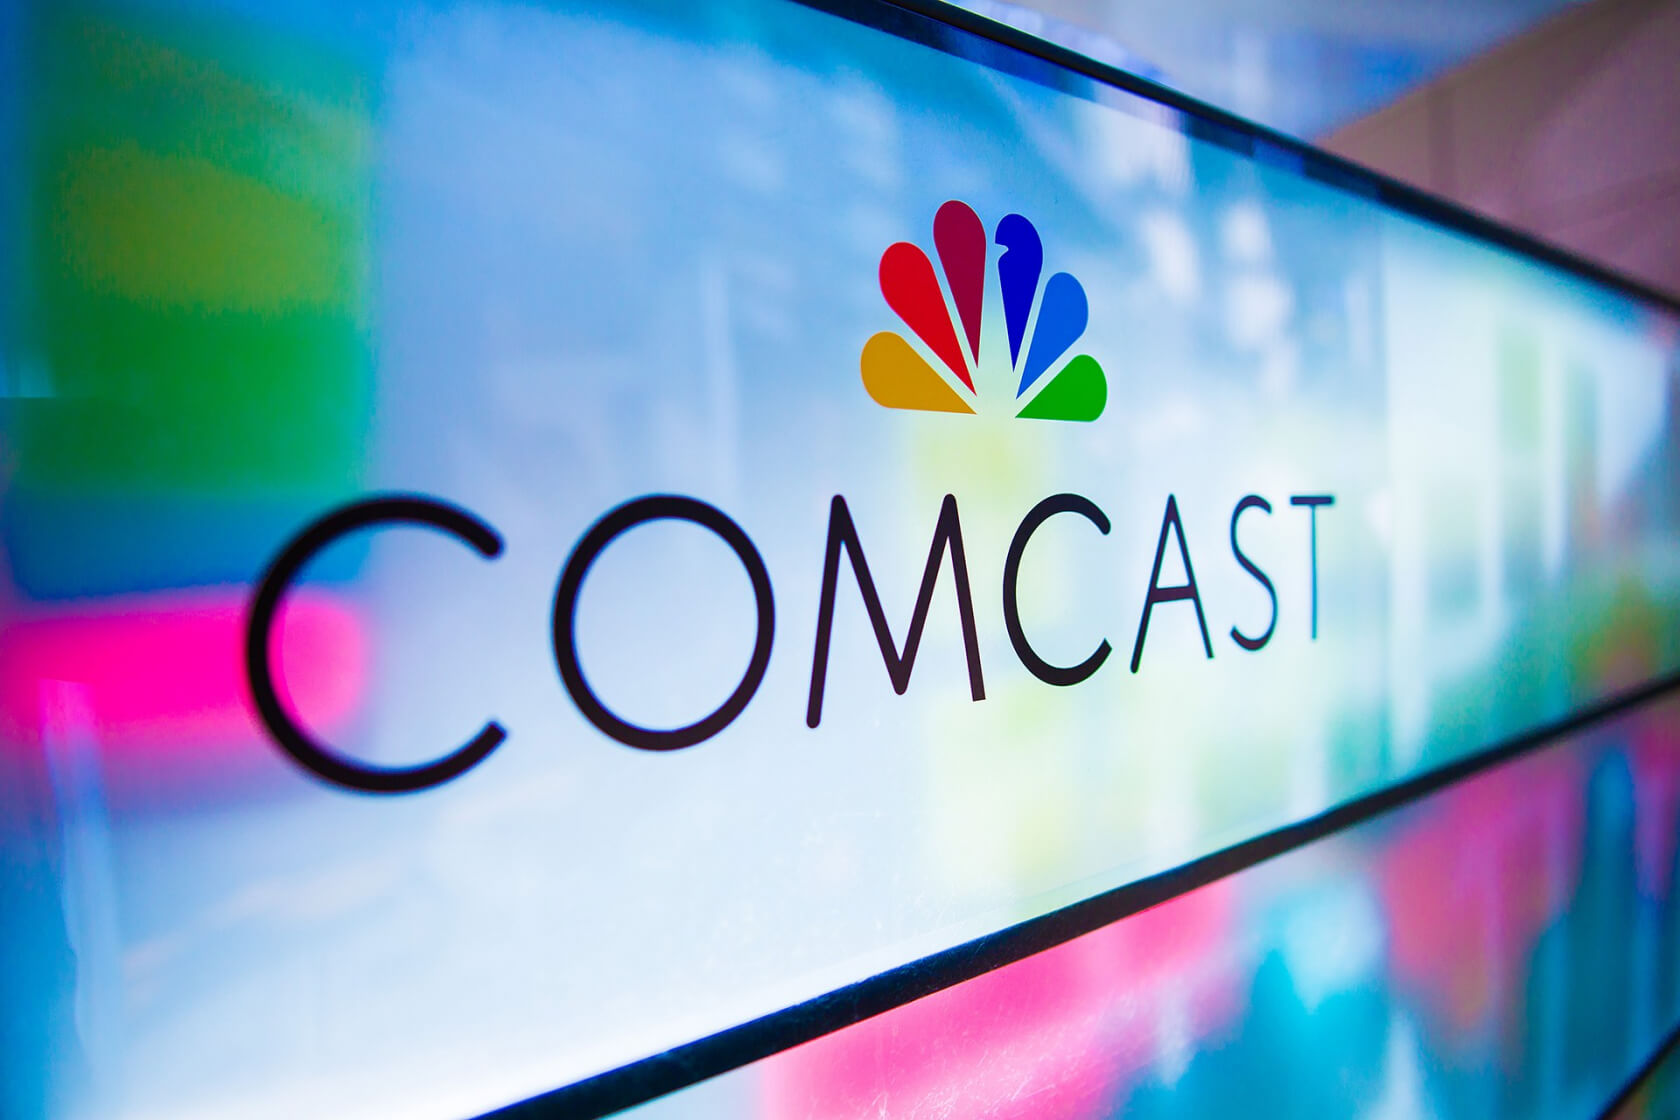 Comcast said new tax bill would create thousands of jobs, ended up quietly firing 500 instead